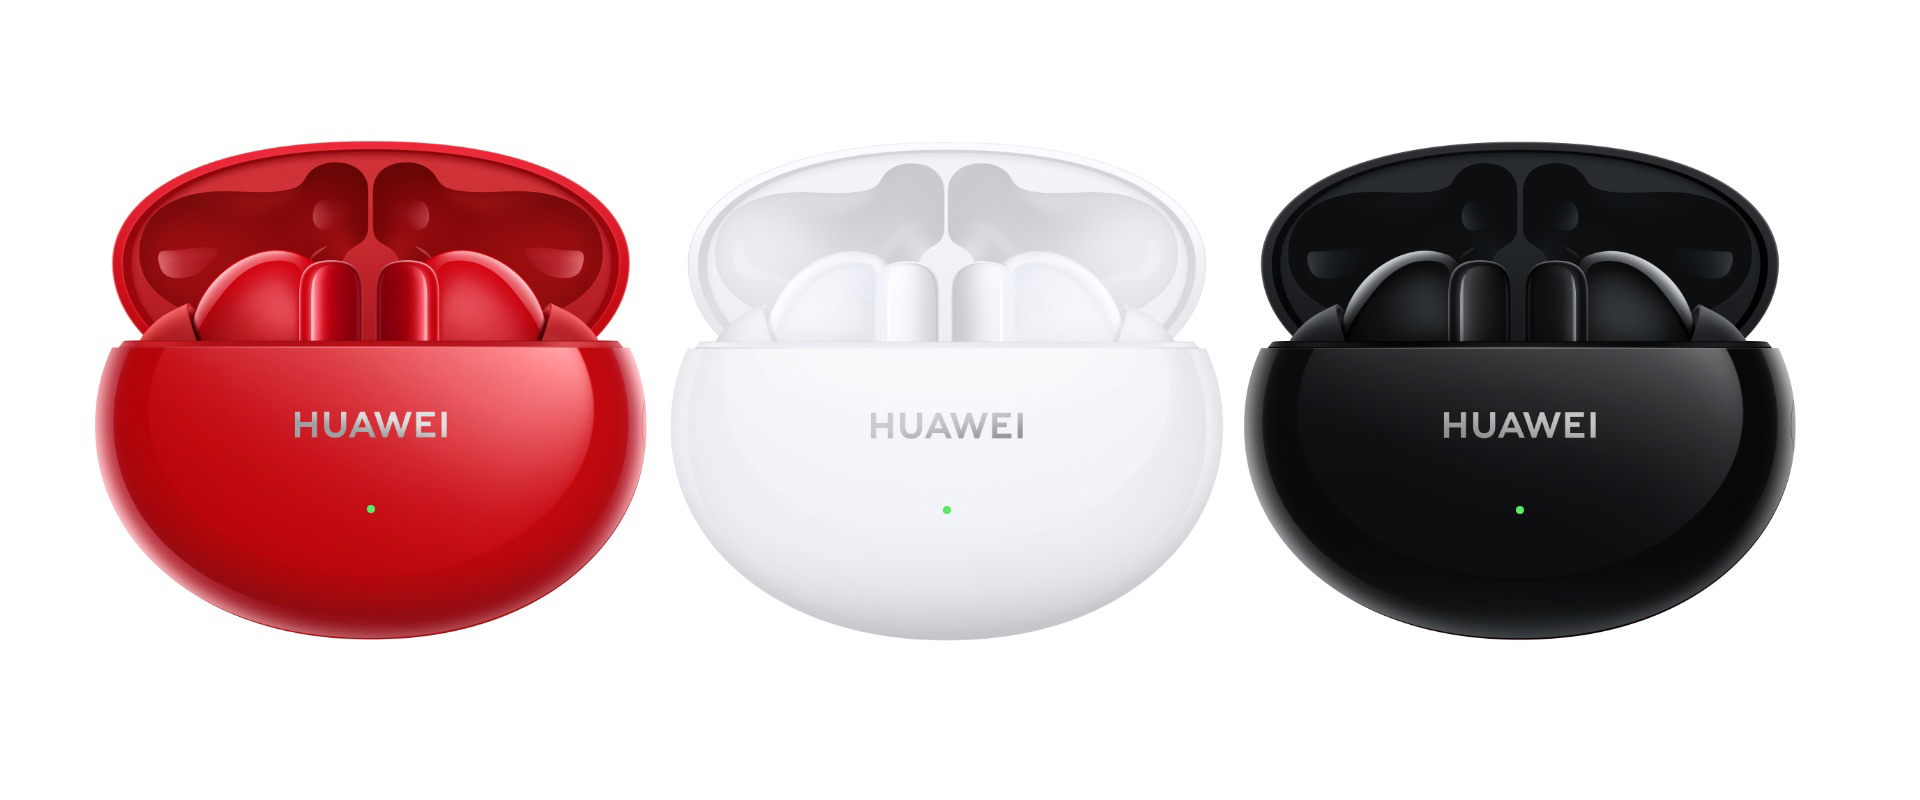 Huawei FreeBuds 4i are ANC true wireless earbuds with up to 10 hours of playback on a single charge